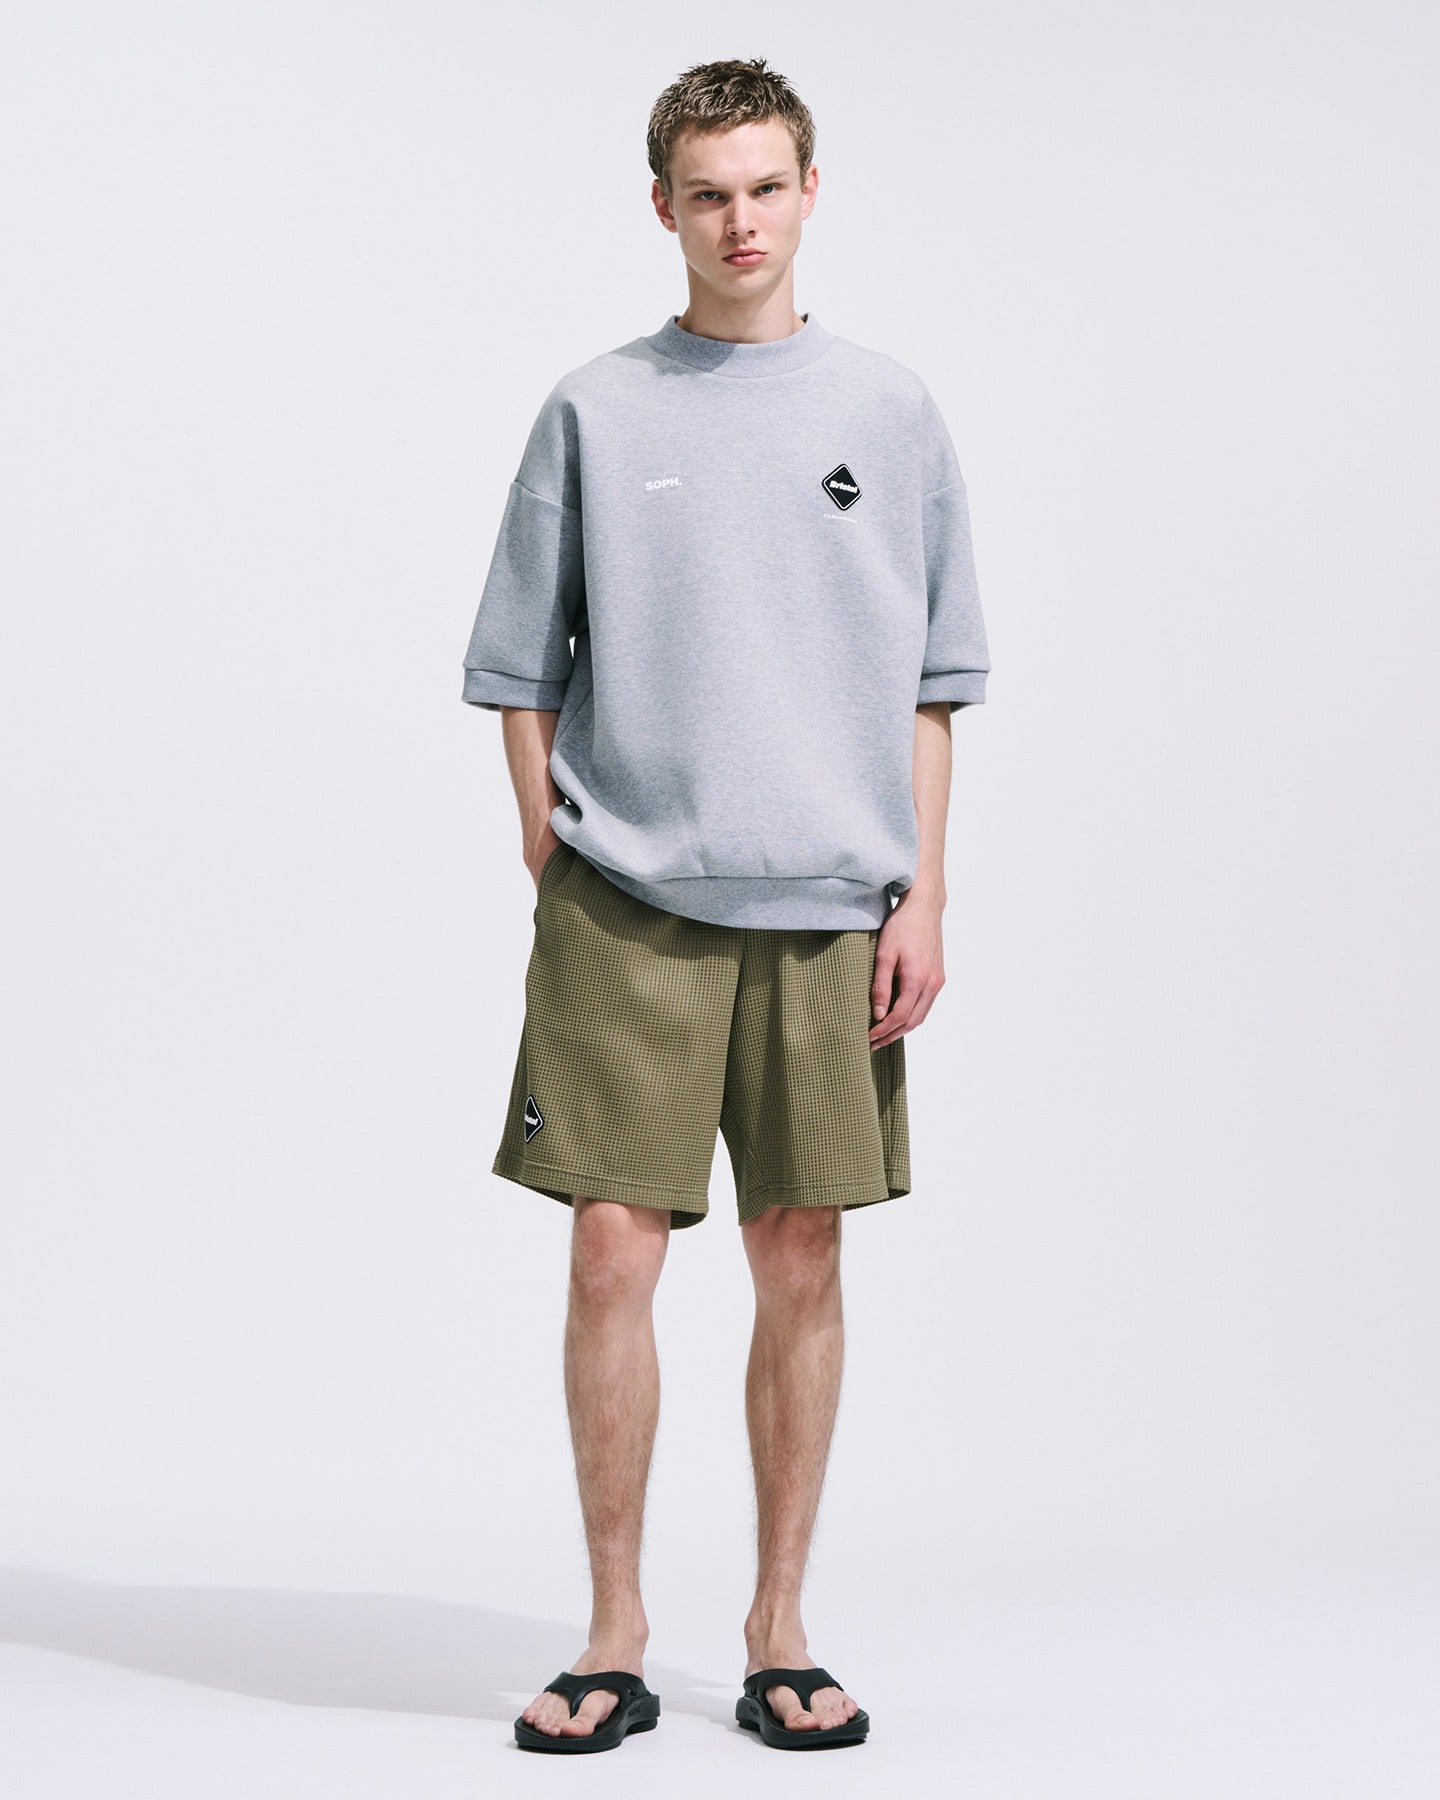 SOPH. | TECH WAFFLE TEAM RELAX SHORTS(M OFF WHITE):